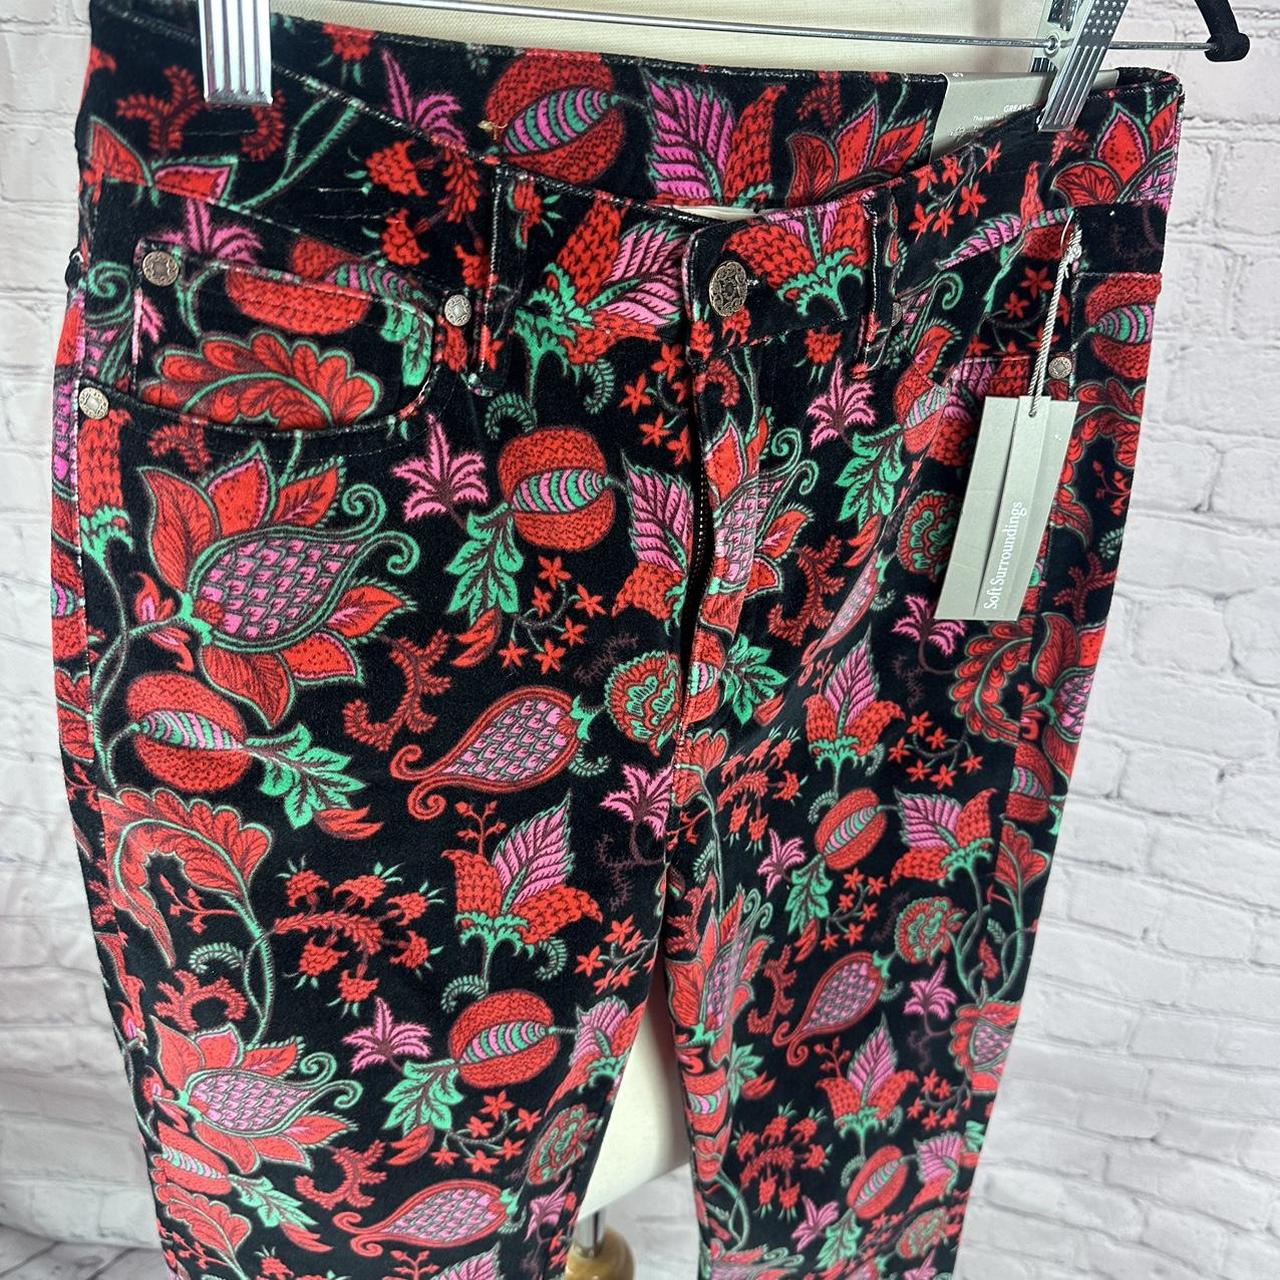 Soft Surroundings floral printed pants Black with a - Depop